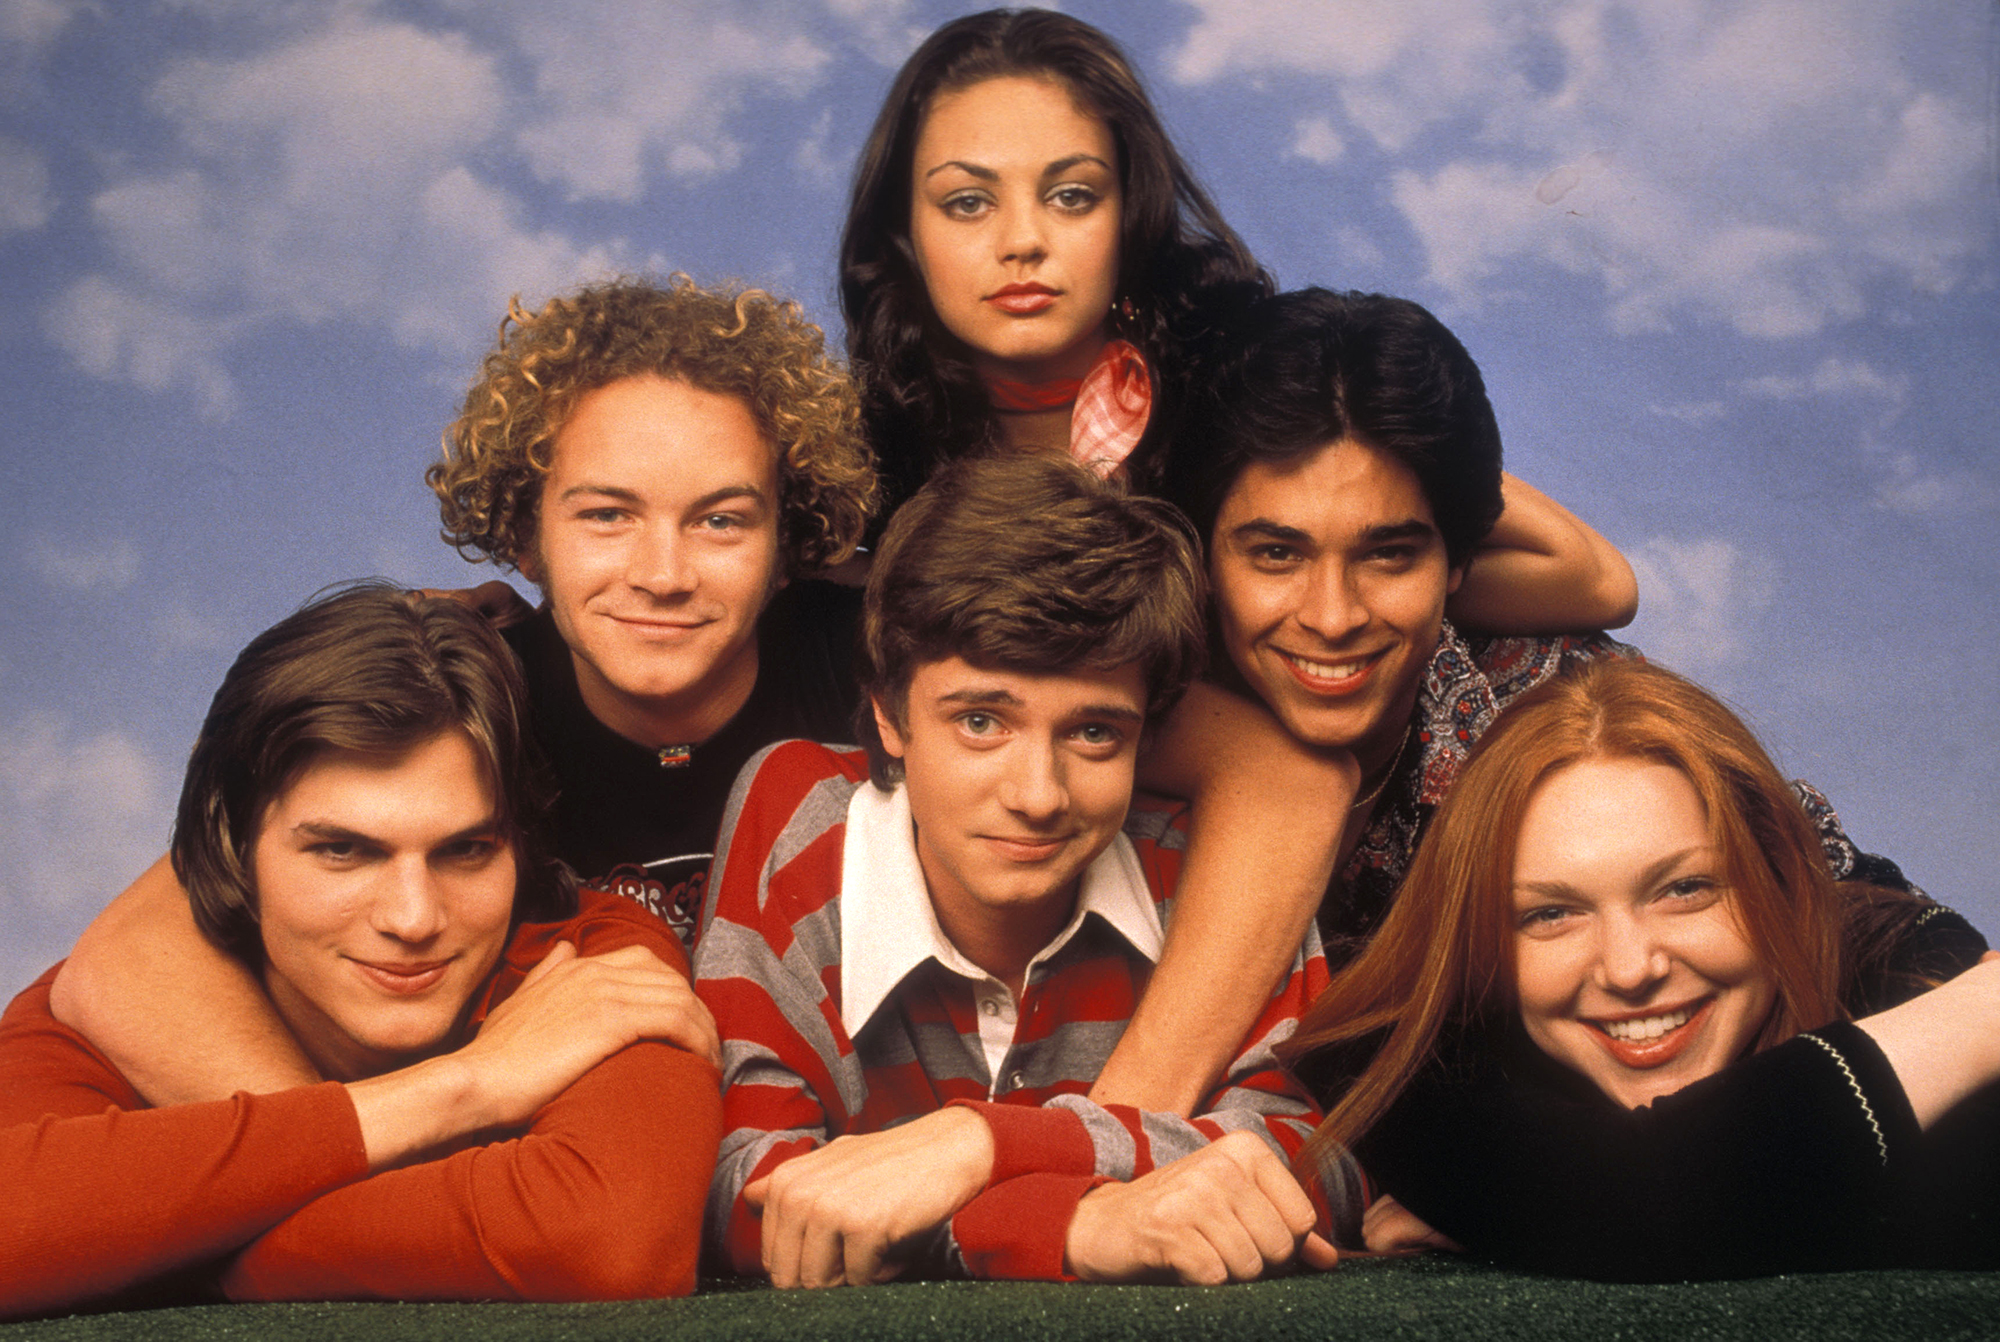 ‘That ’90s Show’: That ’70s Show is Renewed for a Sequel on Netflix